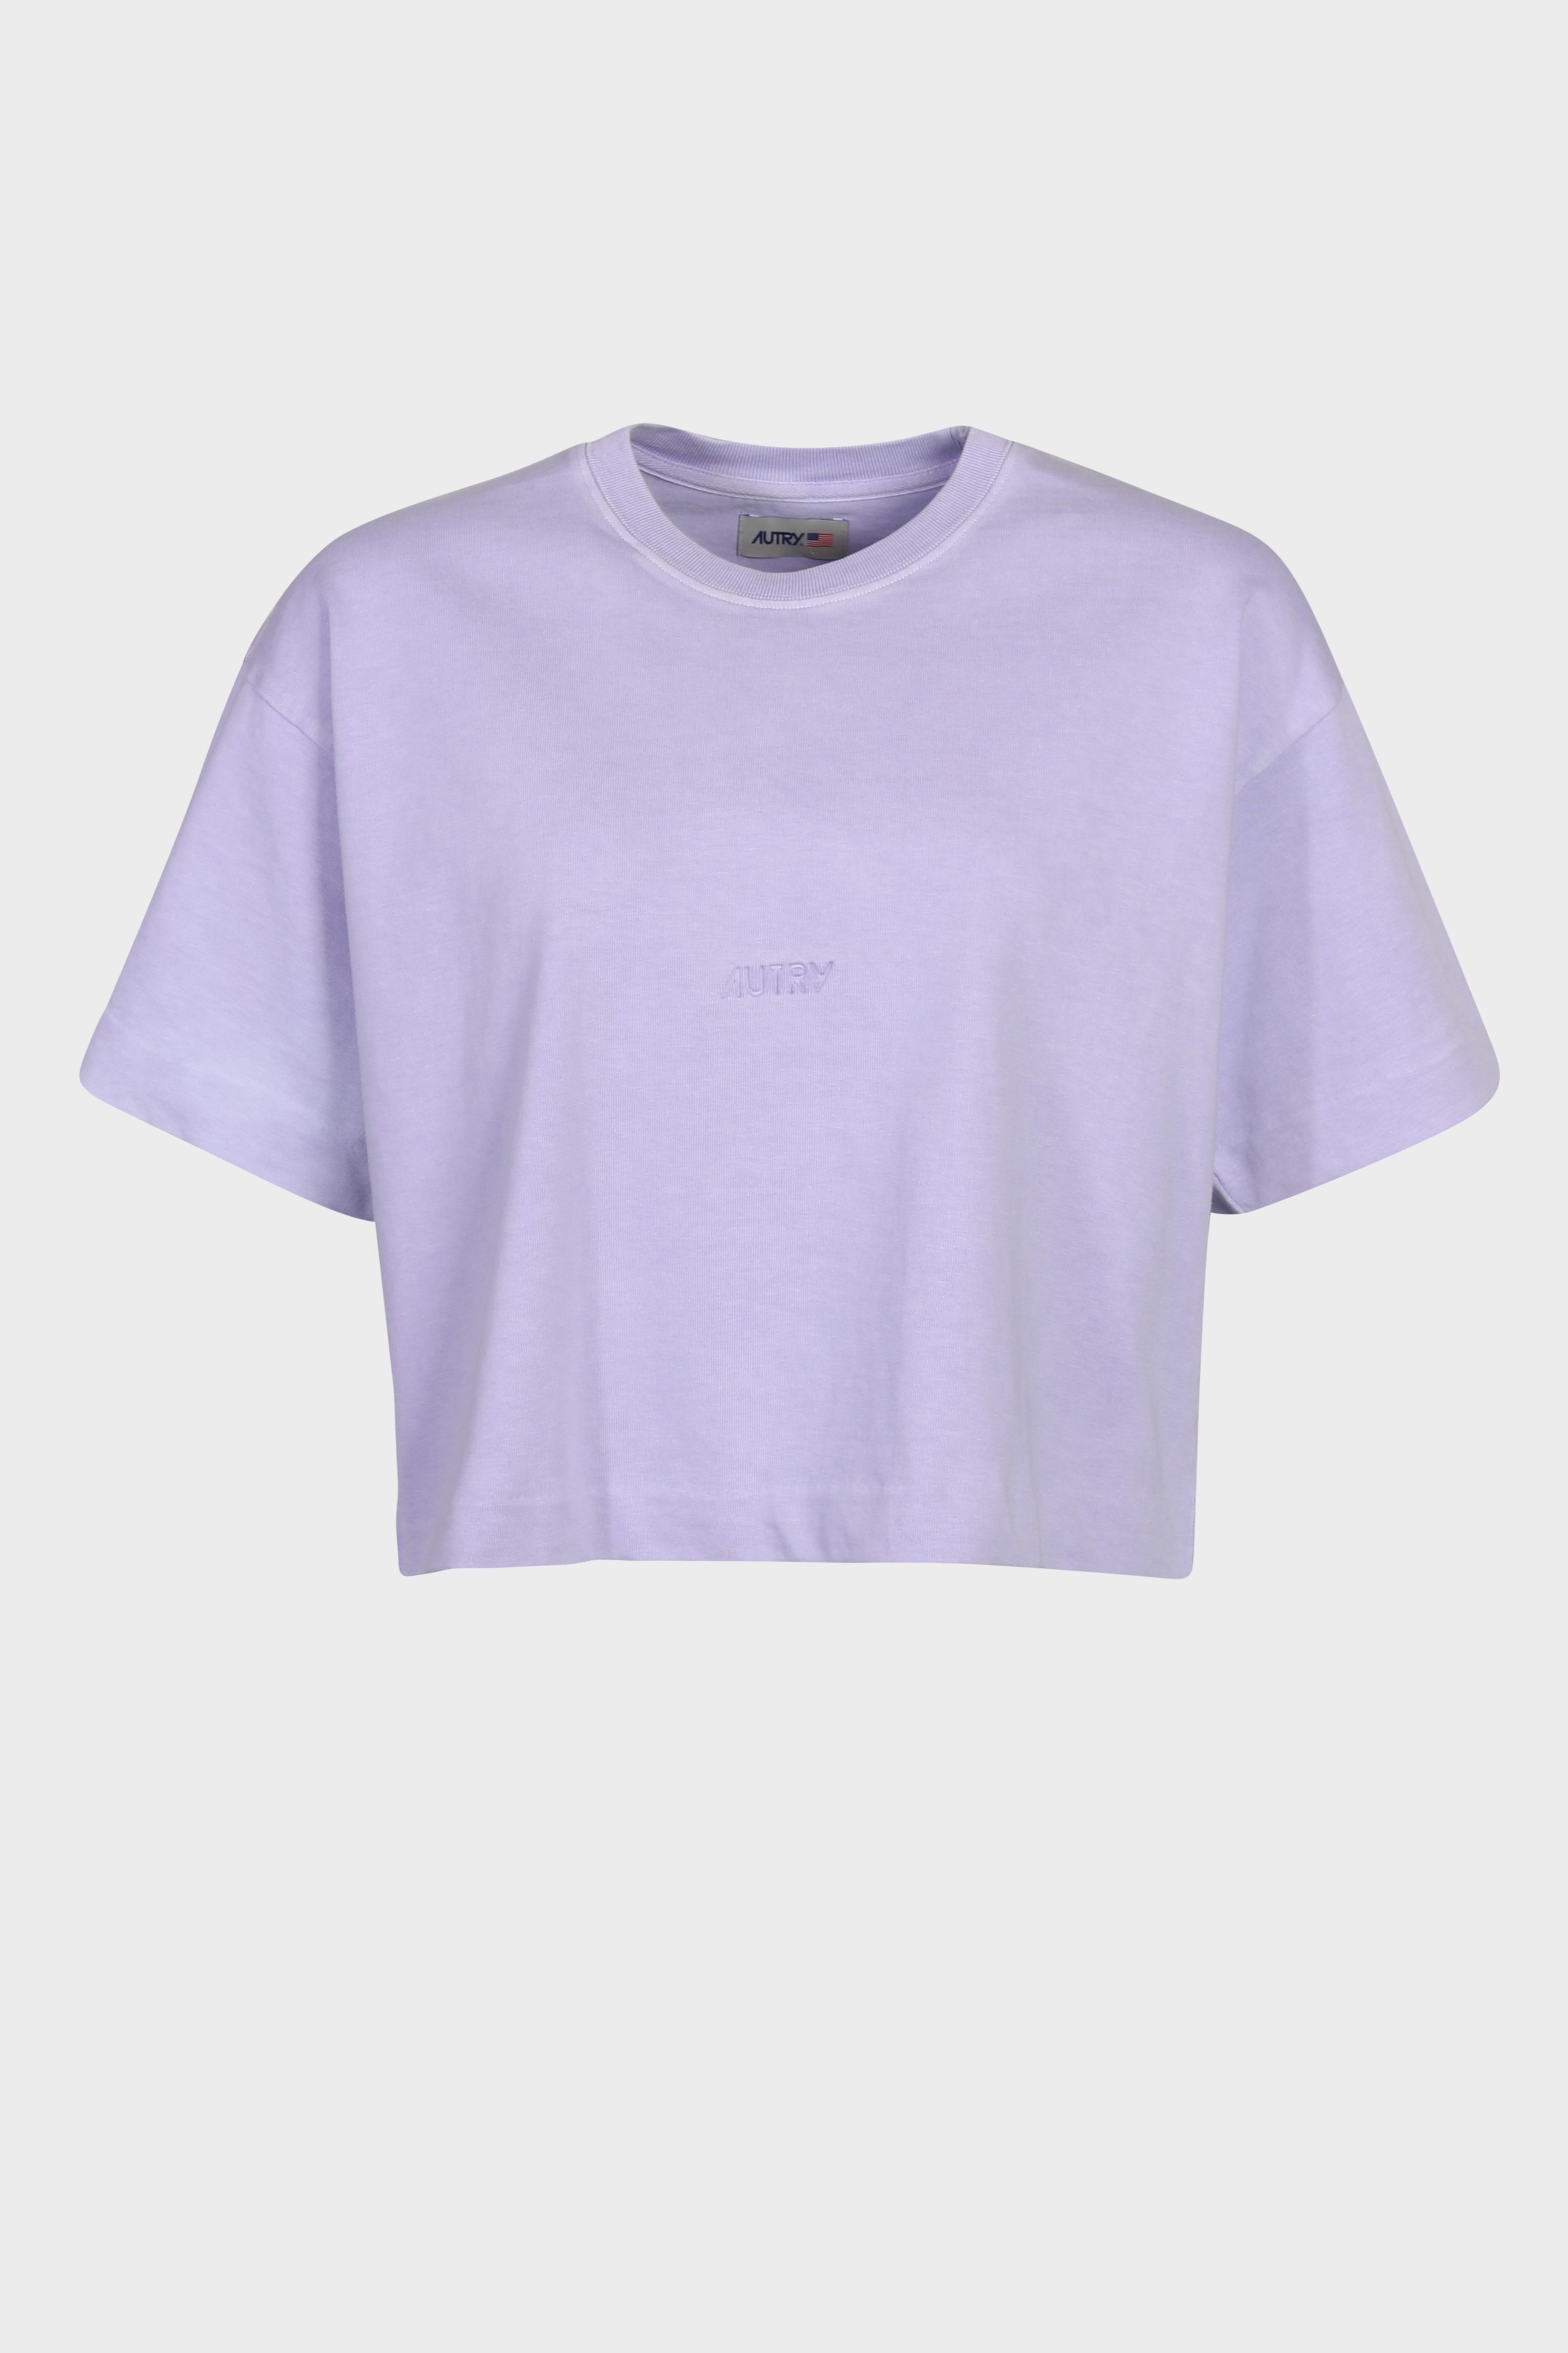 AUTRY ACTION PEOPLE Apparel T-Shirt in Lilac XS